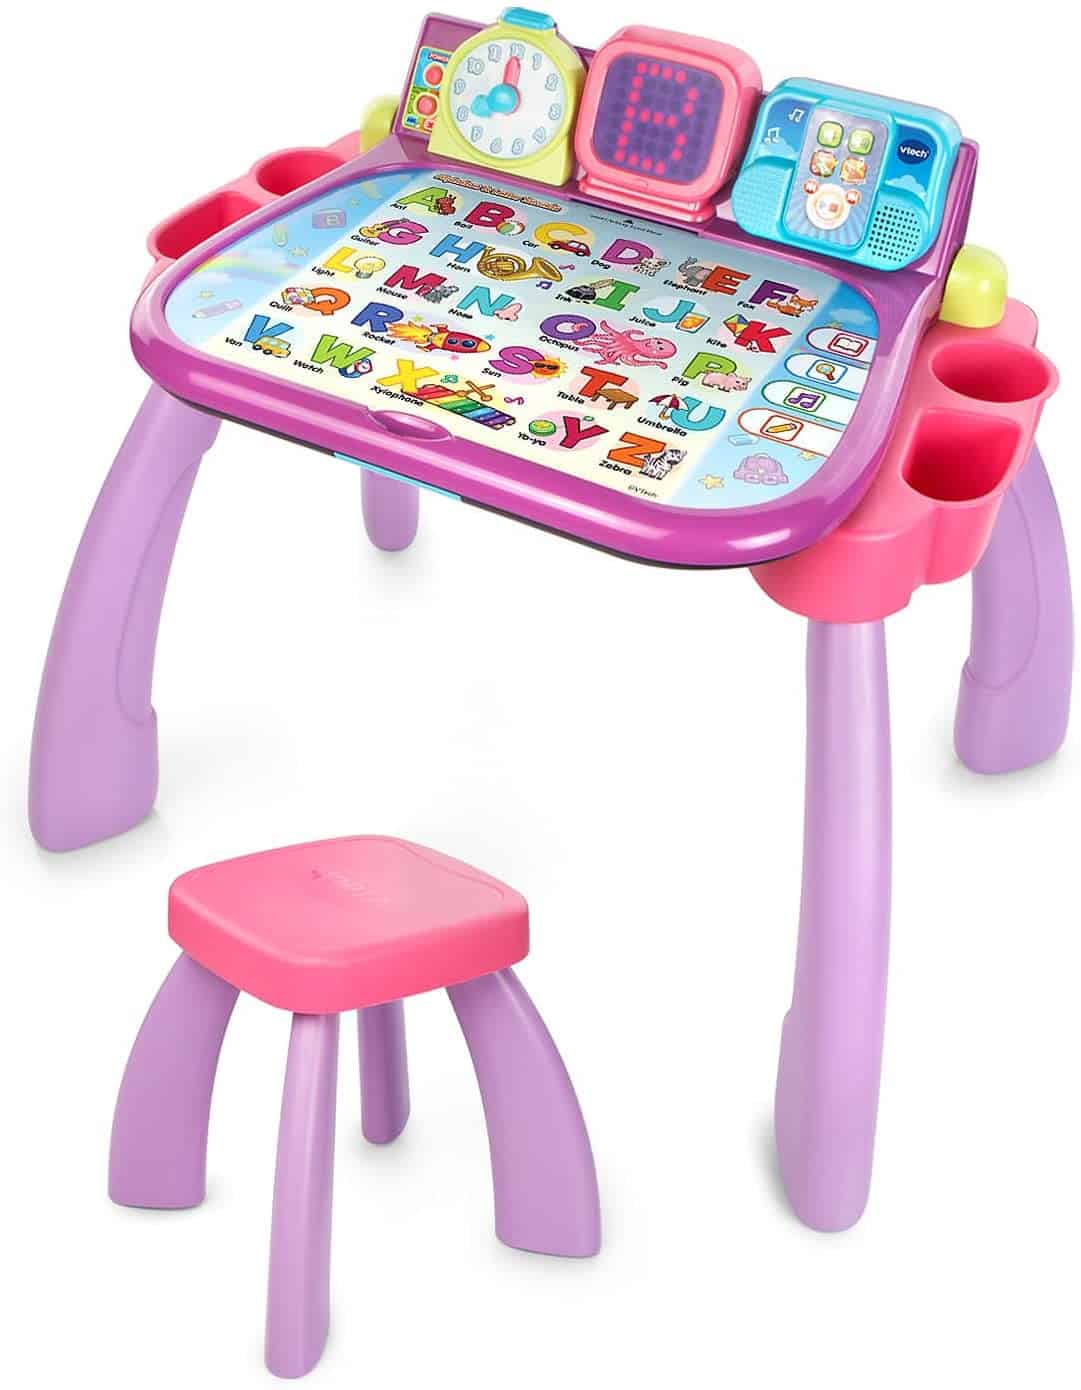 Best musical education: VTech My Magical Interactive Music Table